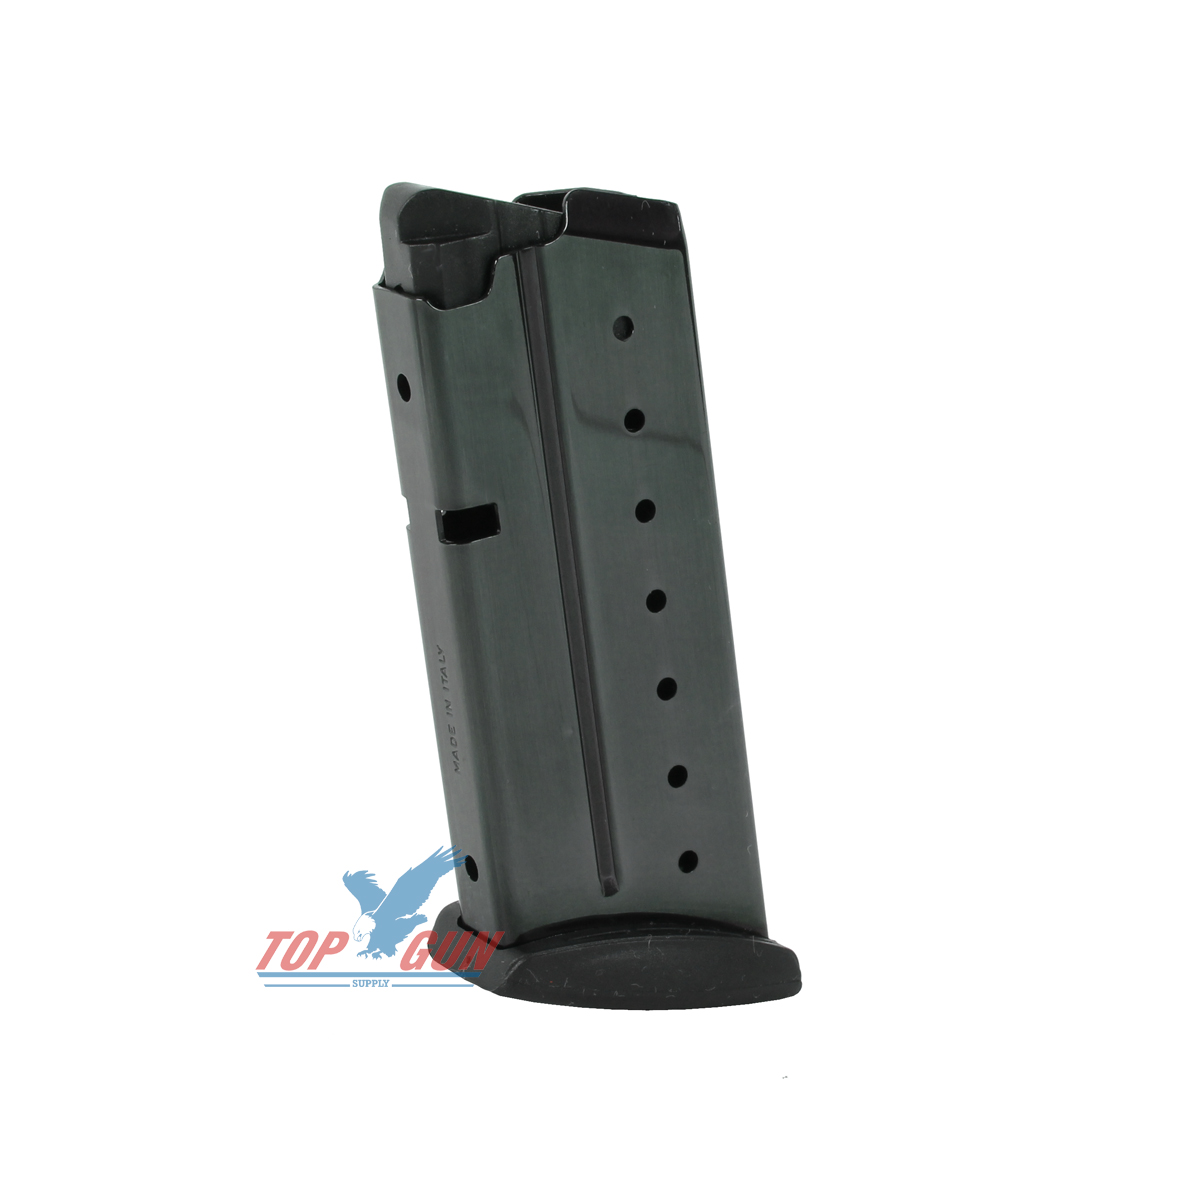 Walther PPS M2 9mm 6RD Magazine